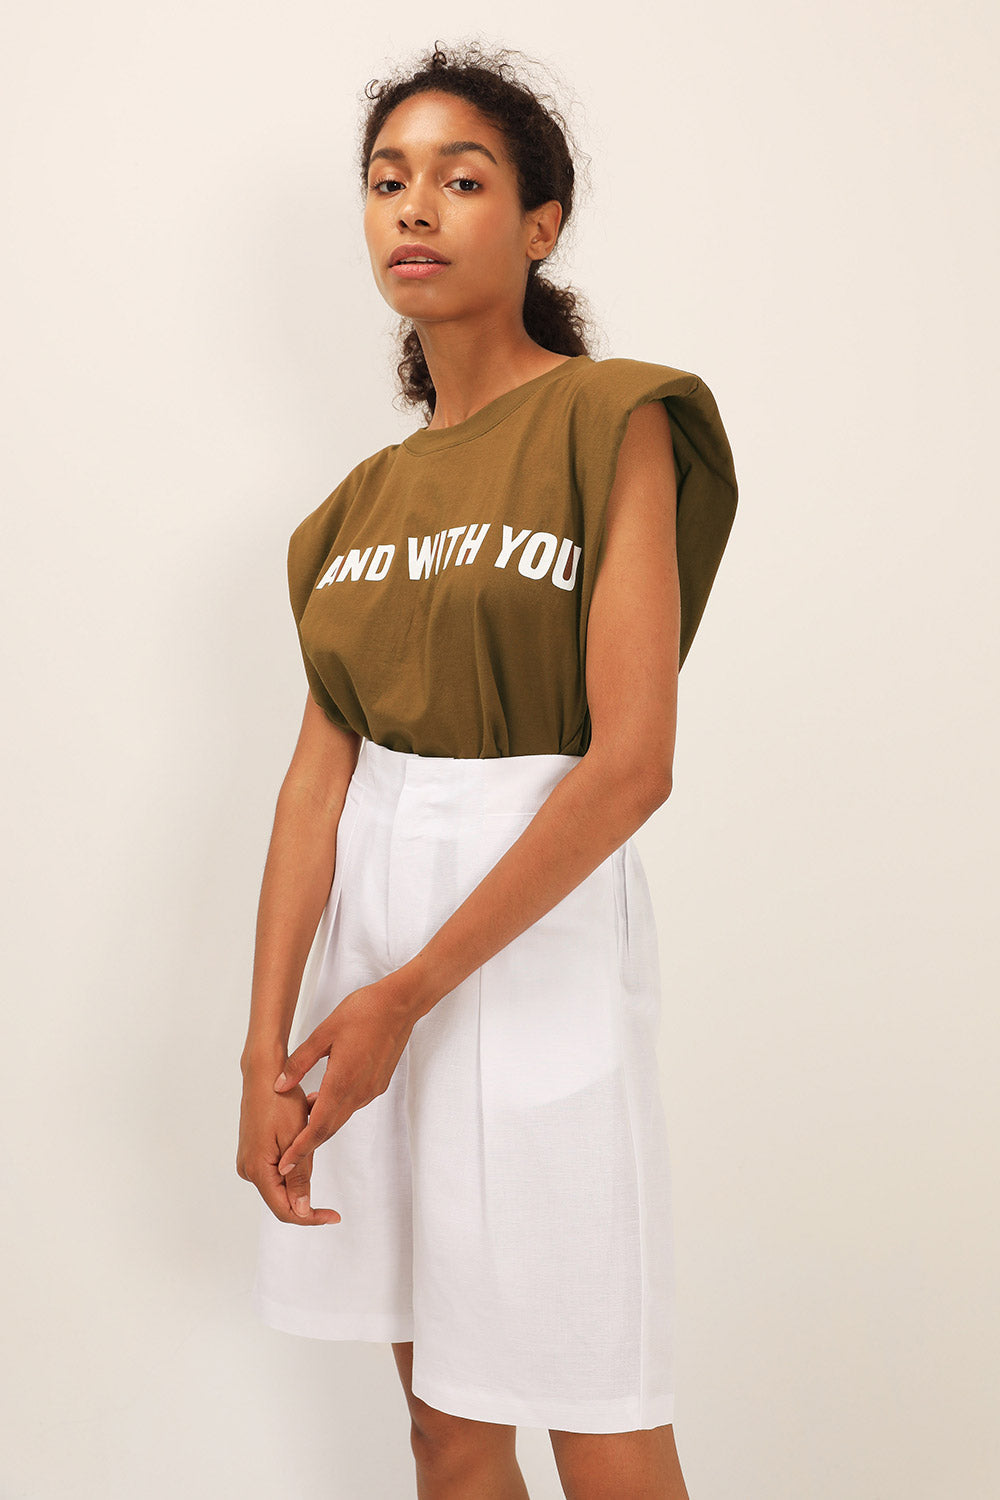 storets.com I Stand With You Padded Shoulder Muscle Top